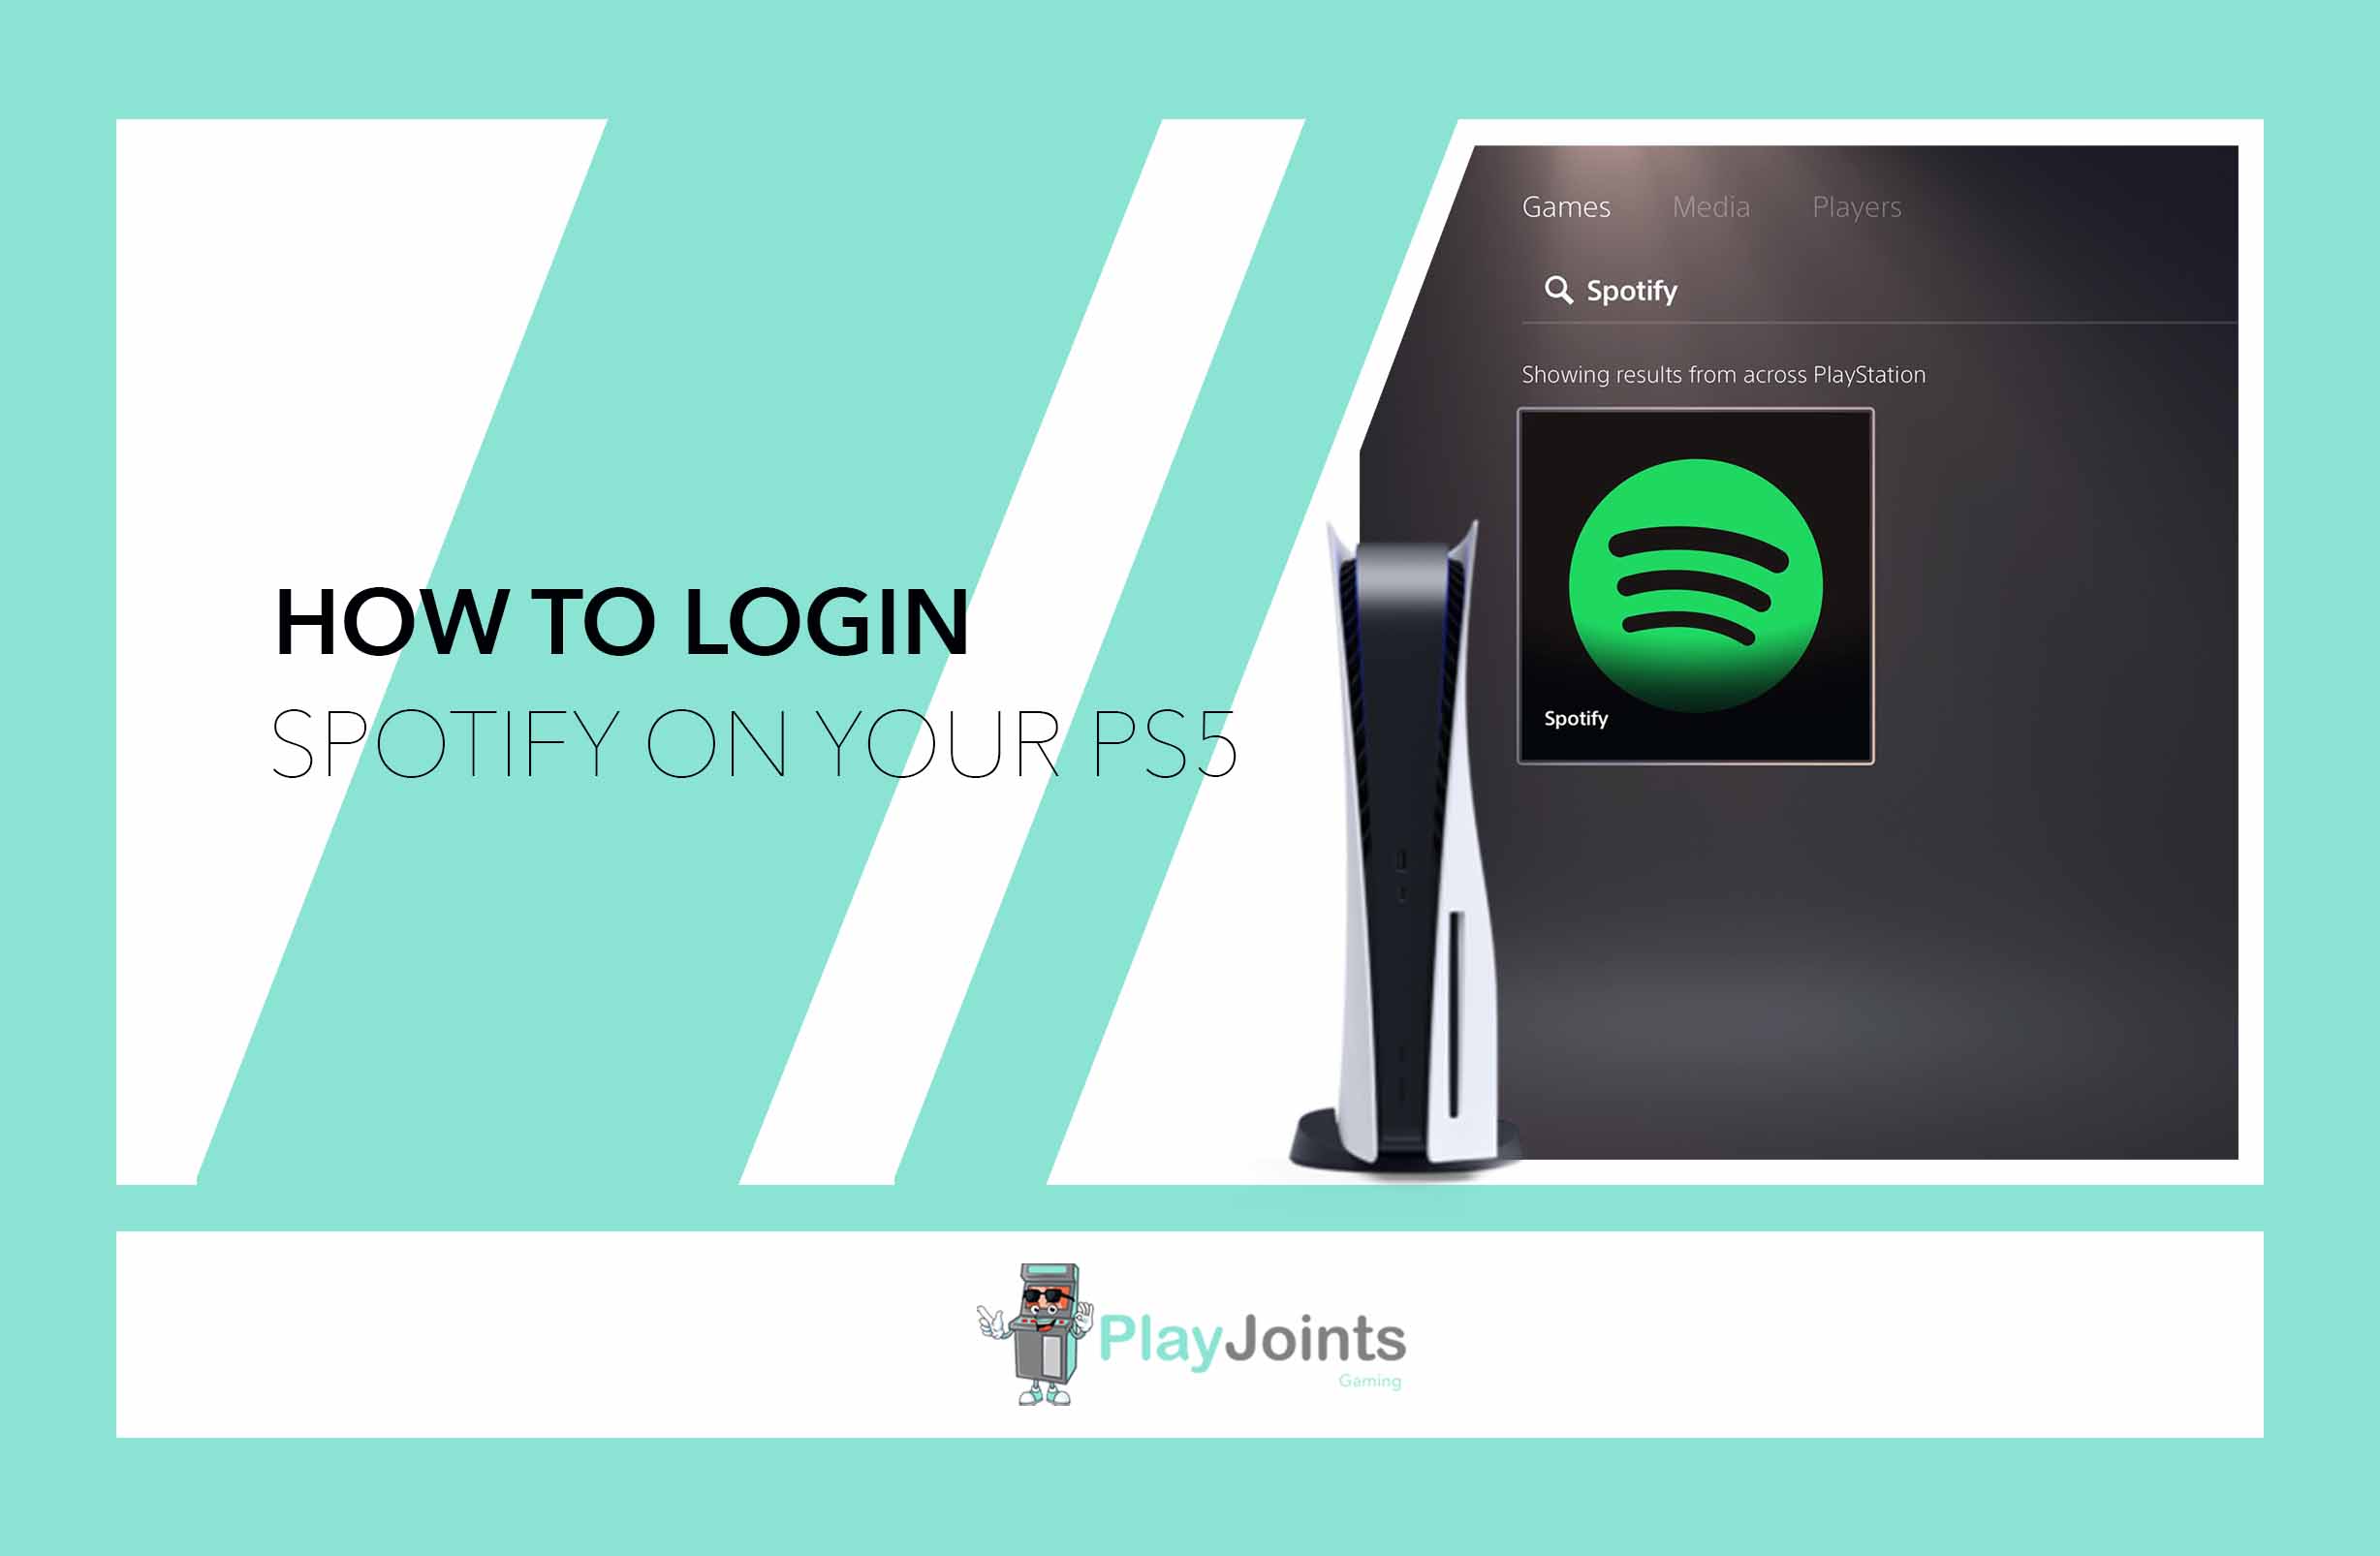 How to Login Spotify on your PS5